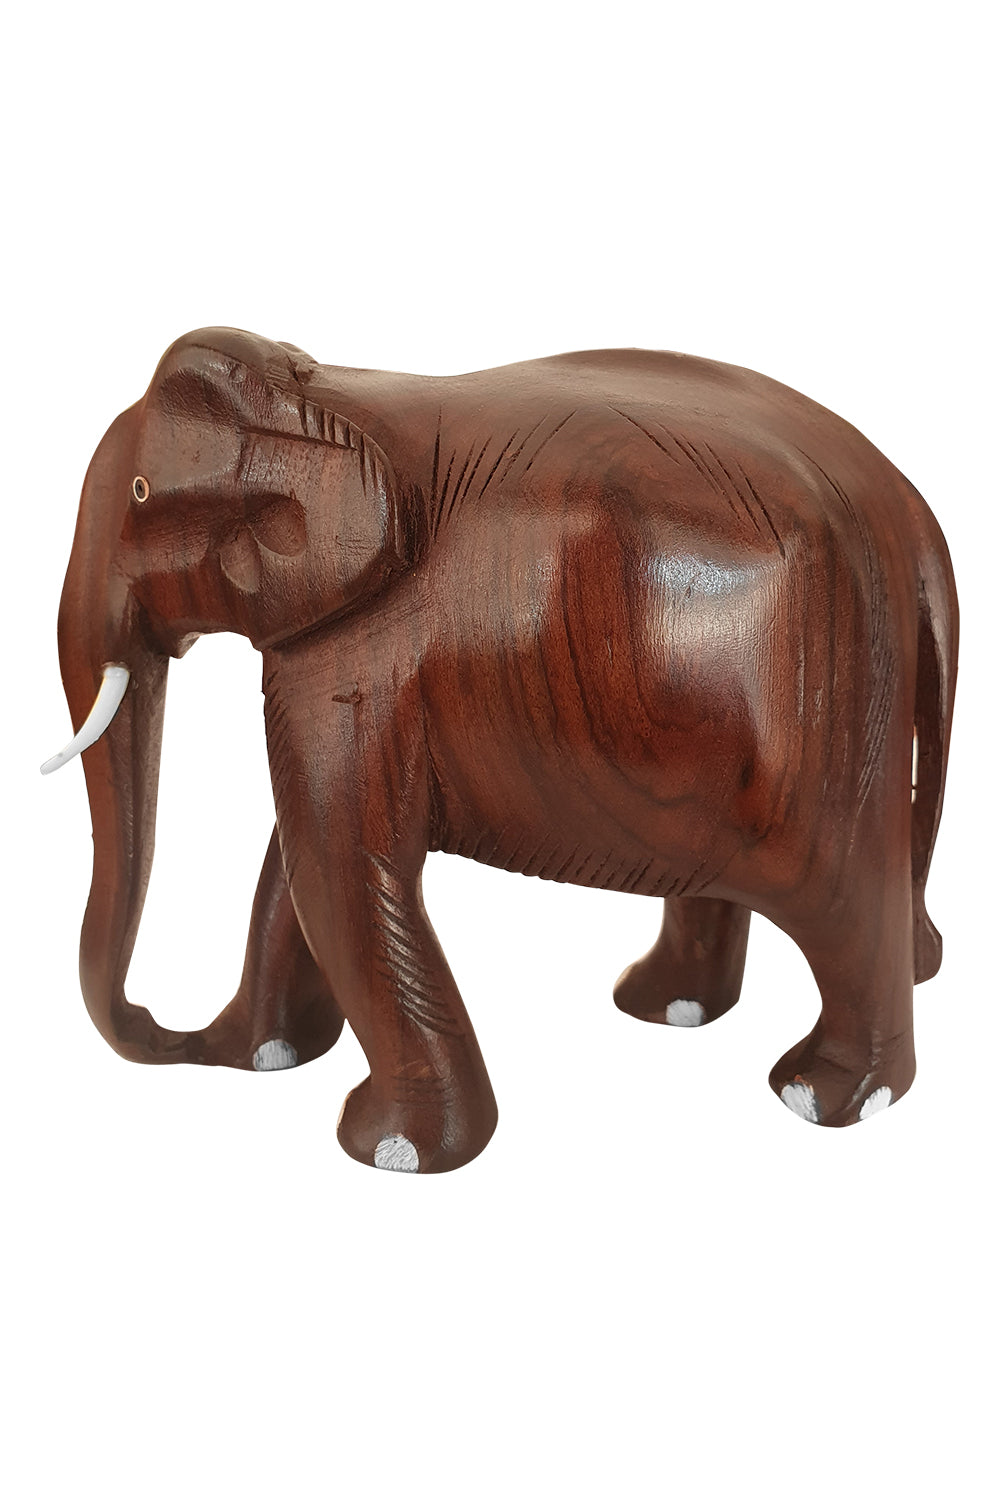 Southloom Handmade Elephant Handicraft (Carved from Rose Wood) 5 Inches